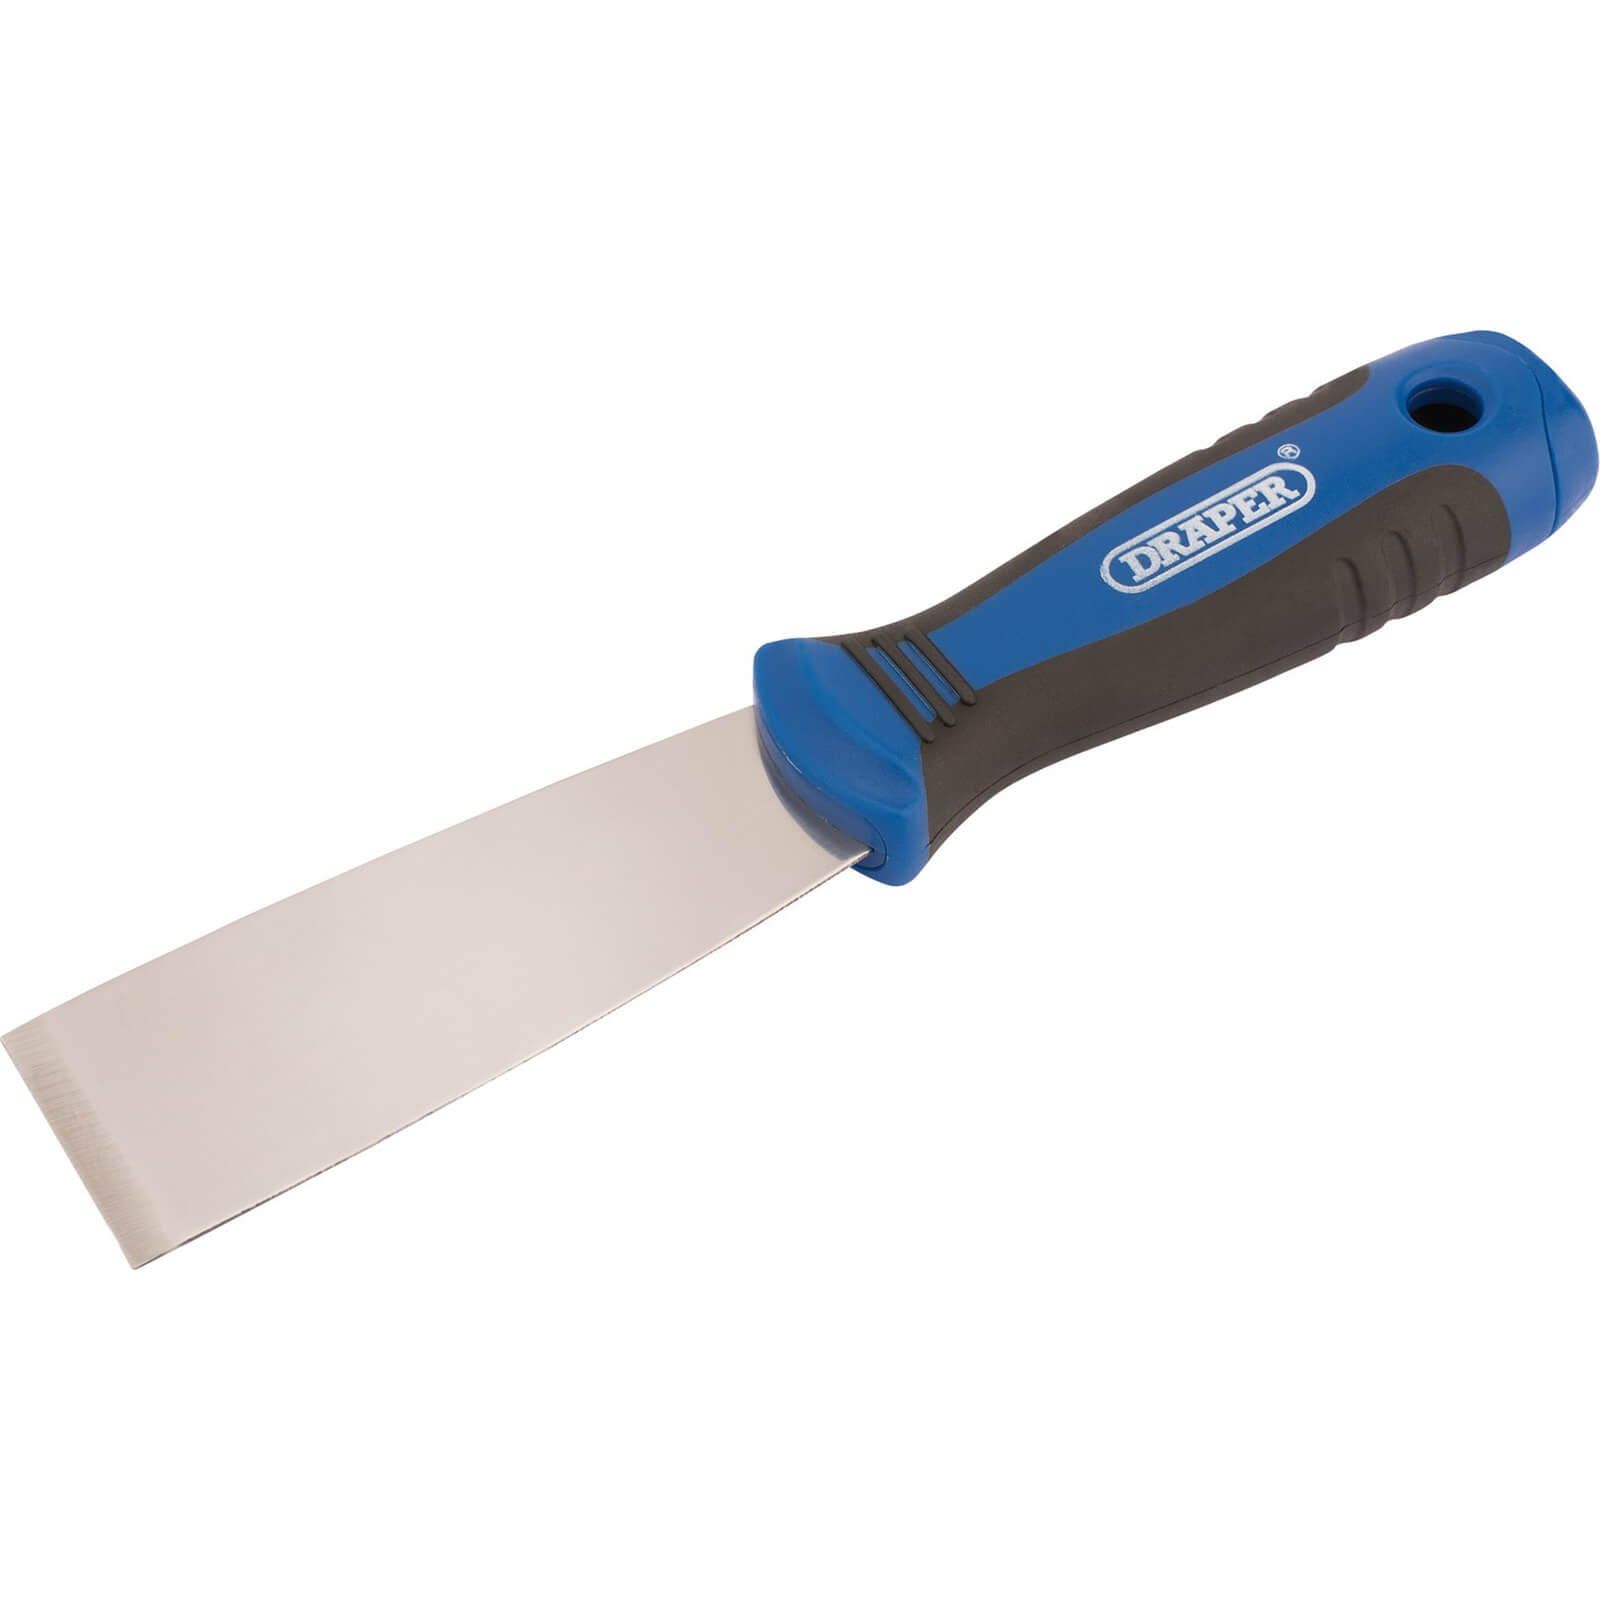 Photos - Other for Construction Draper Soft Grip Chisel Knife 38mm 82672 